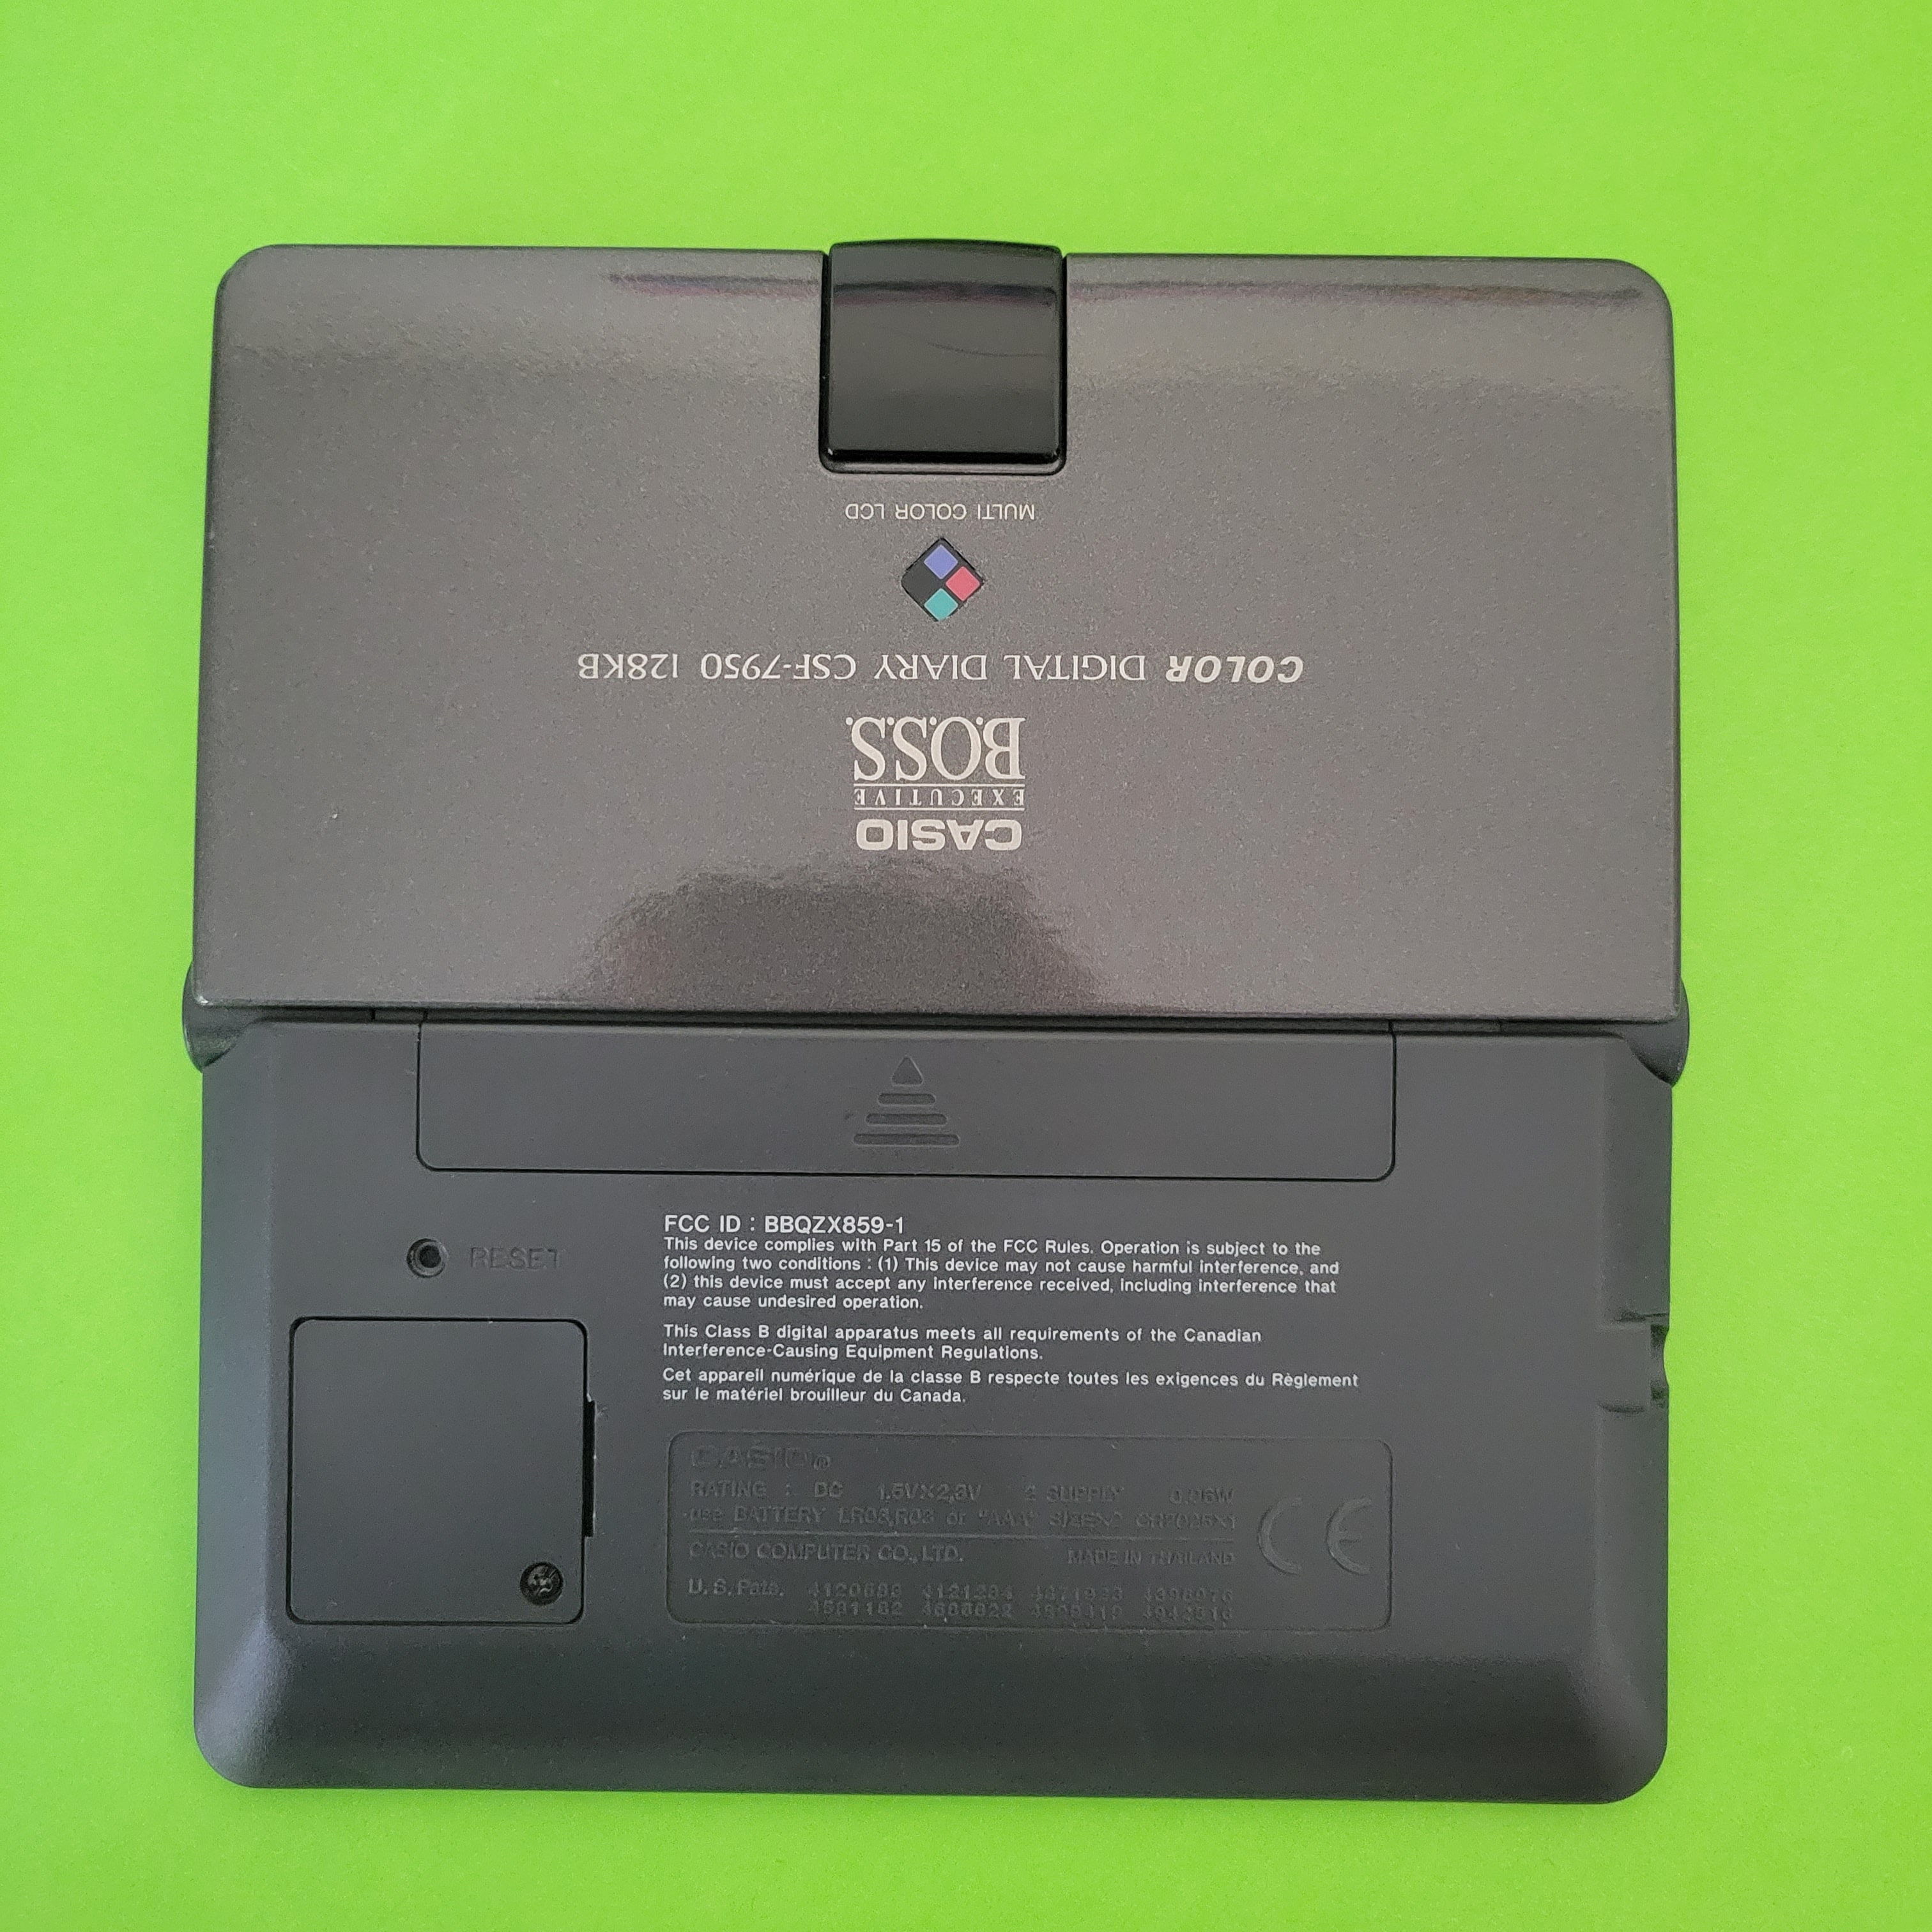 An image of the back of a Casio Color Digital Diary CSF-7950 personal organizer